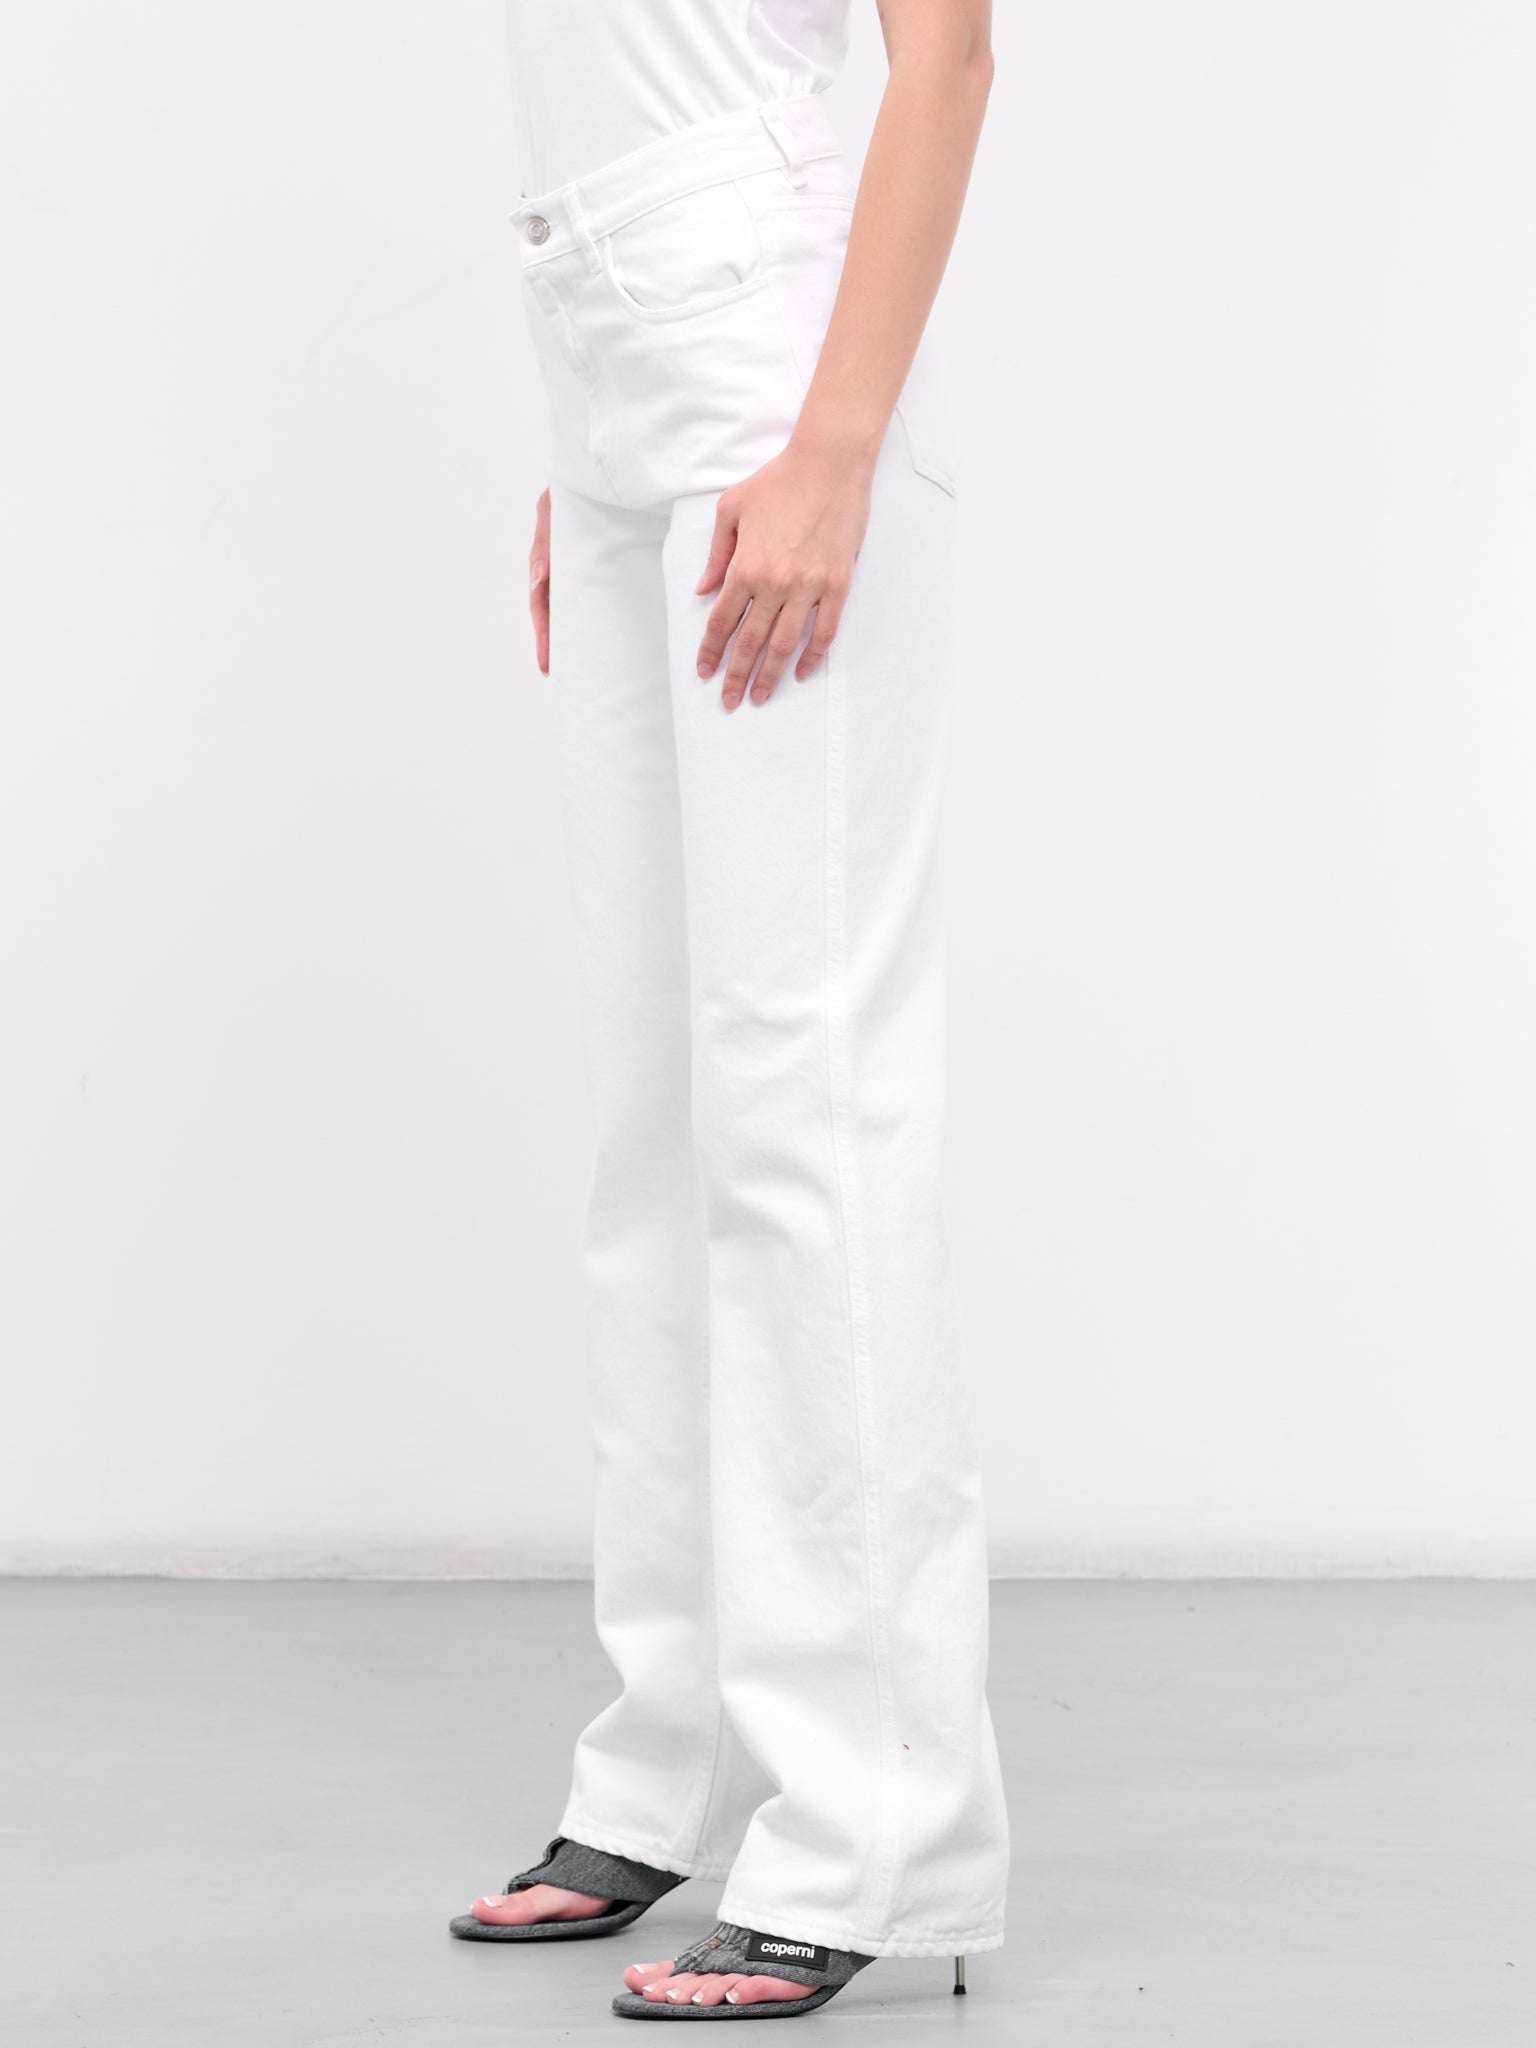 Belted Pocket Jeans (COPP78251-WHITE)